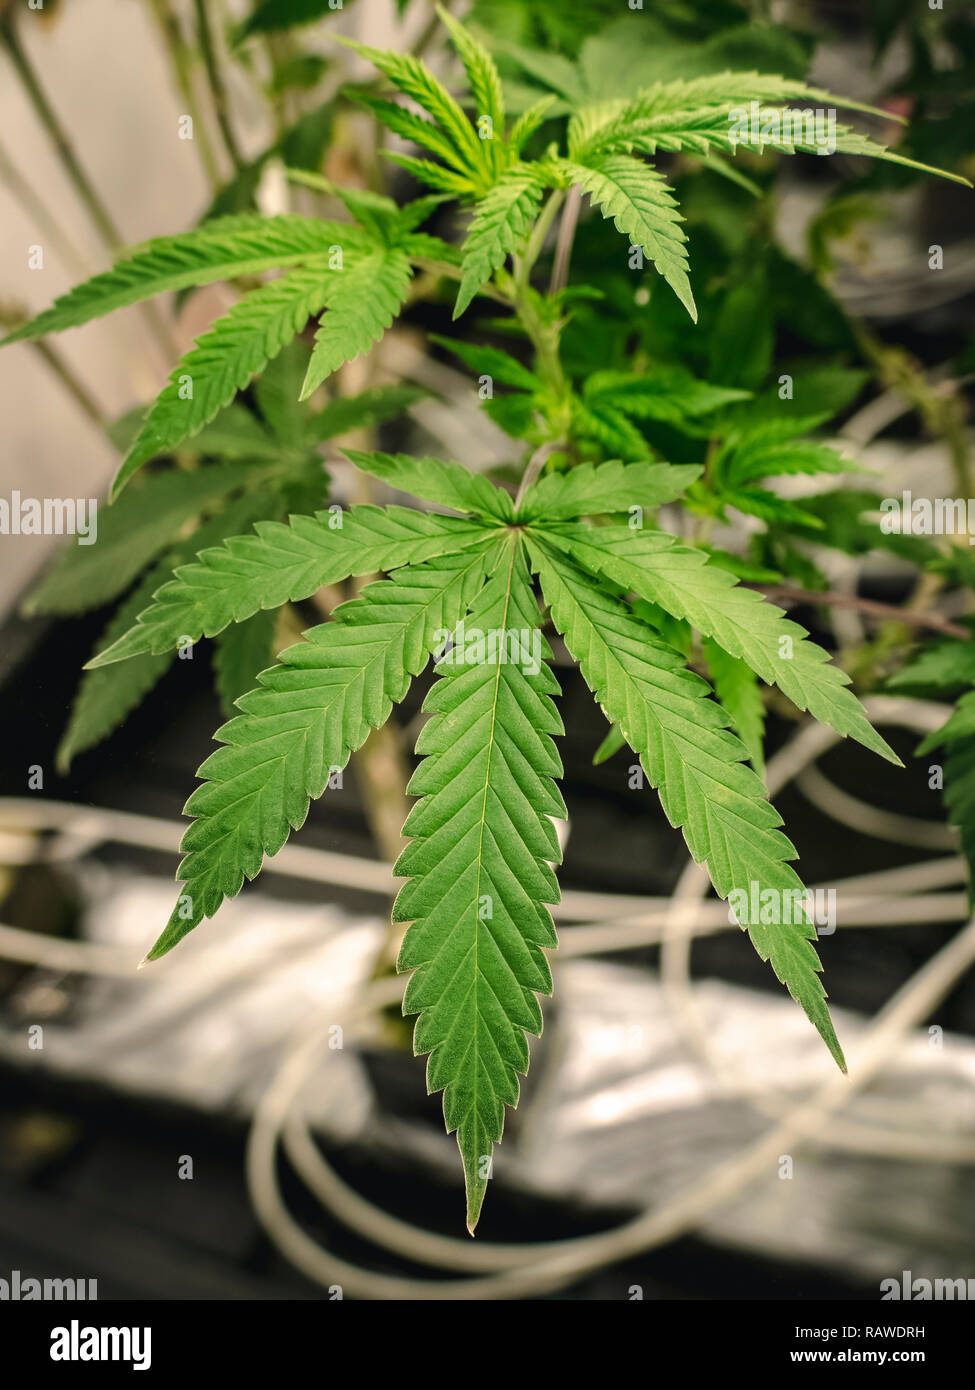 Popular cannabis icon growing on baby plant in early stage Stock Photo